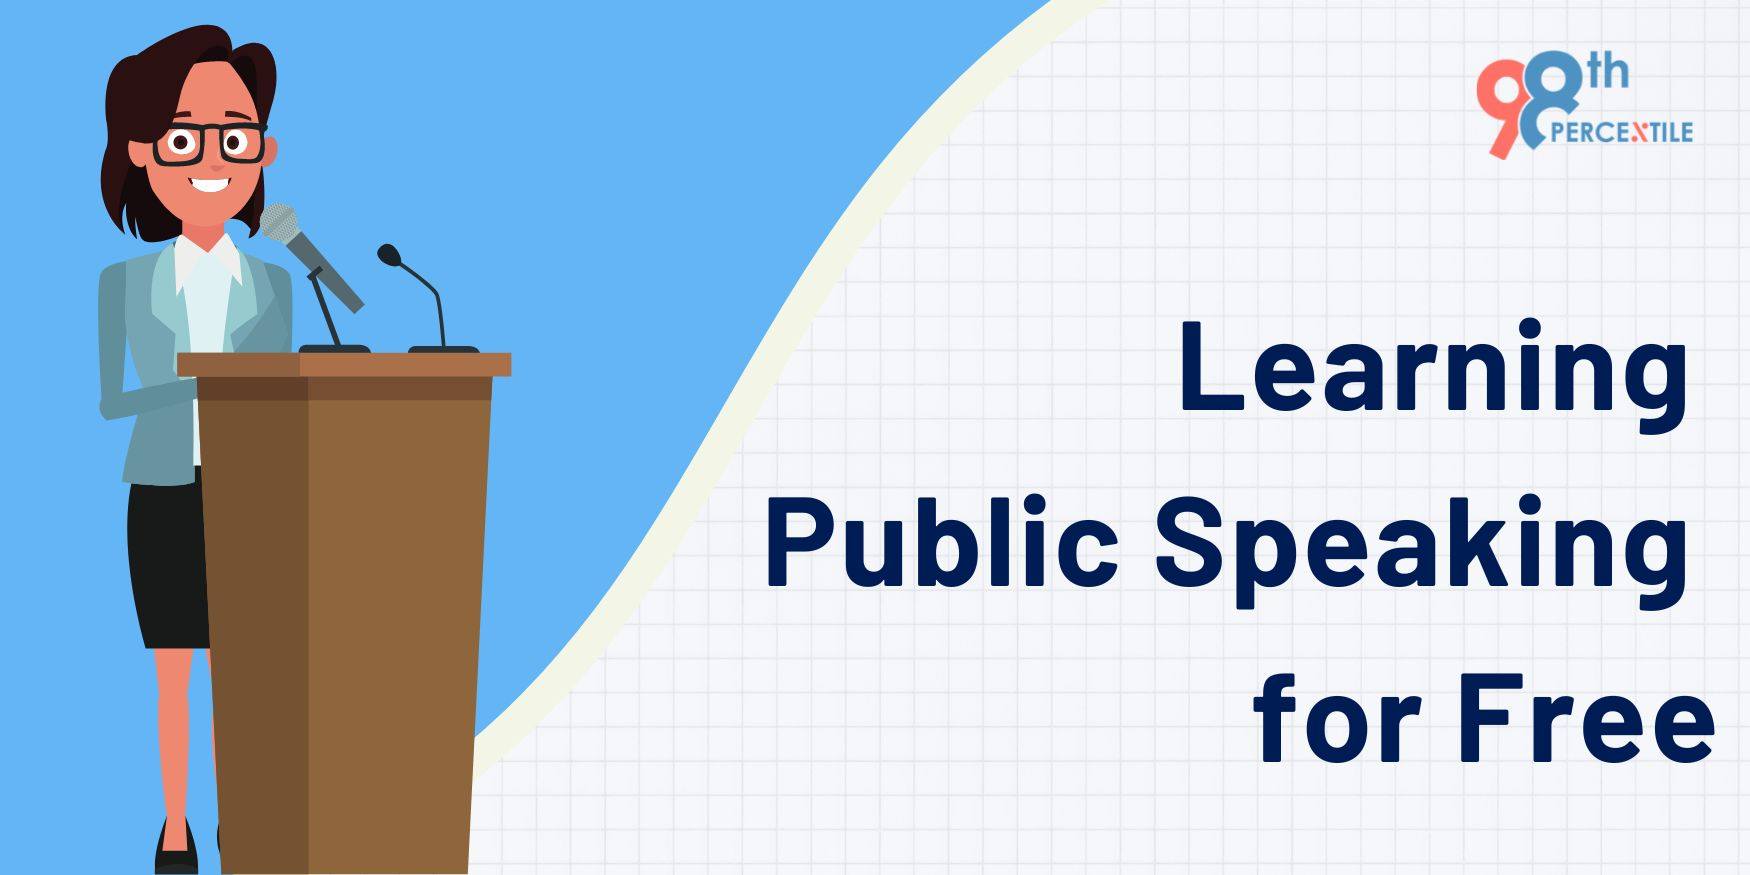 Learning public speaking for free